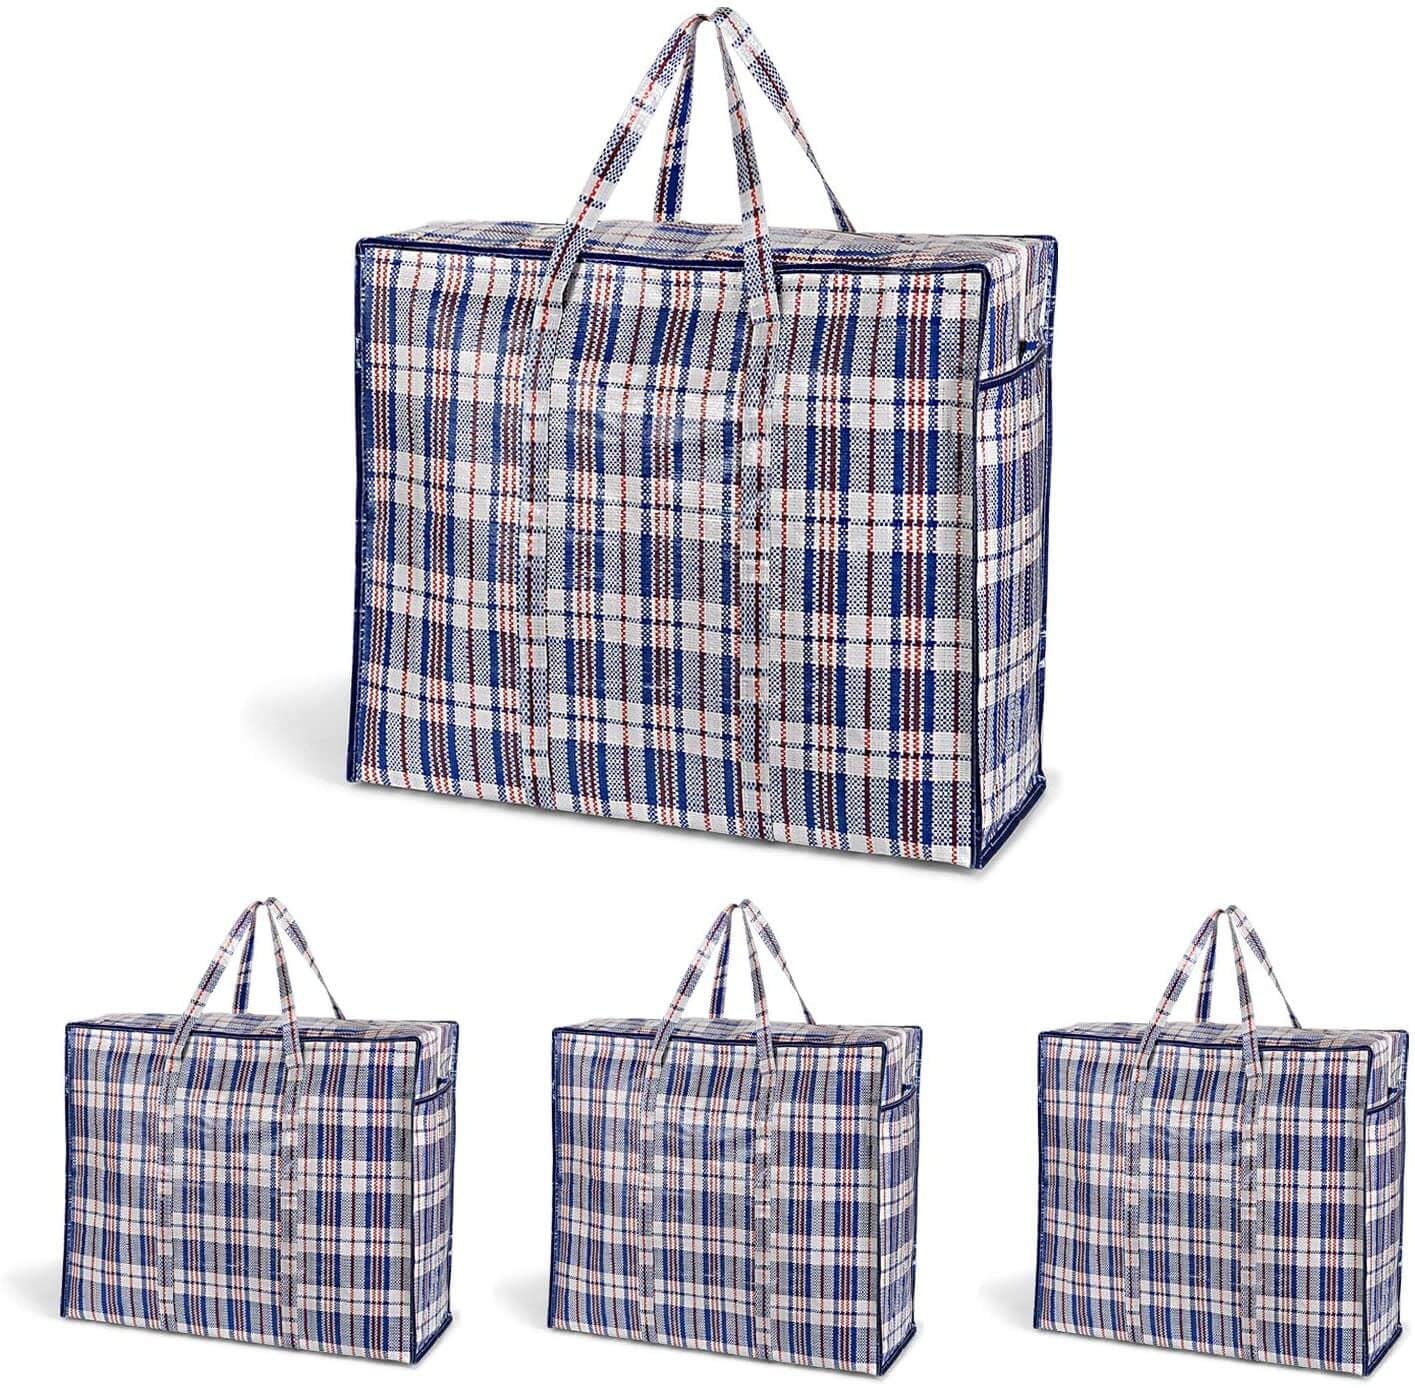 Extra large zippered storage bags